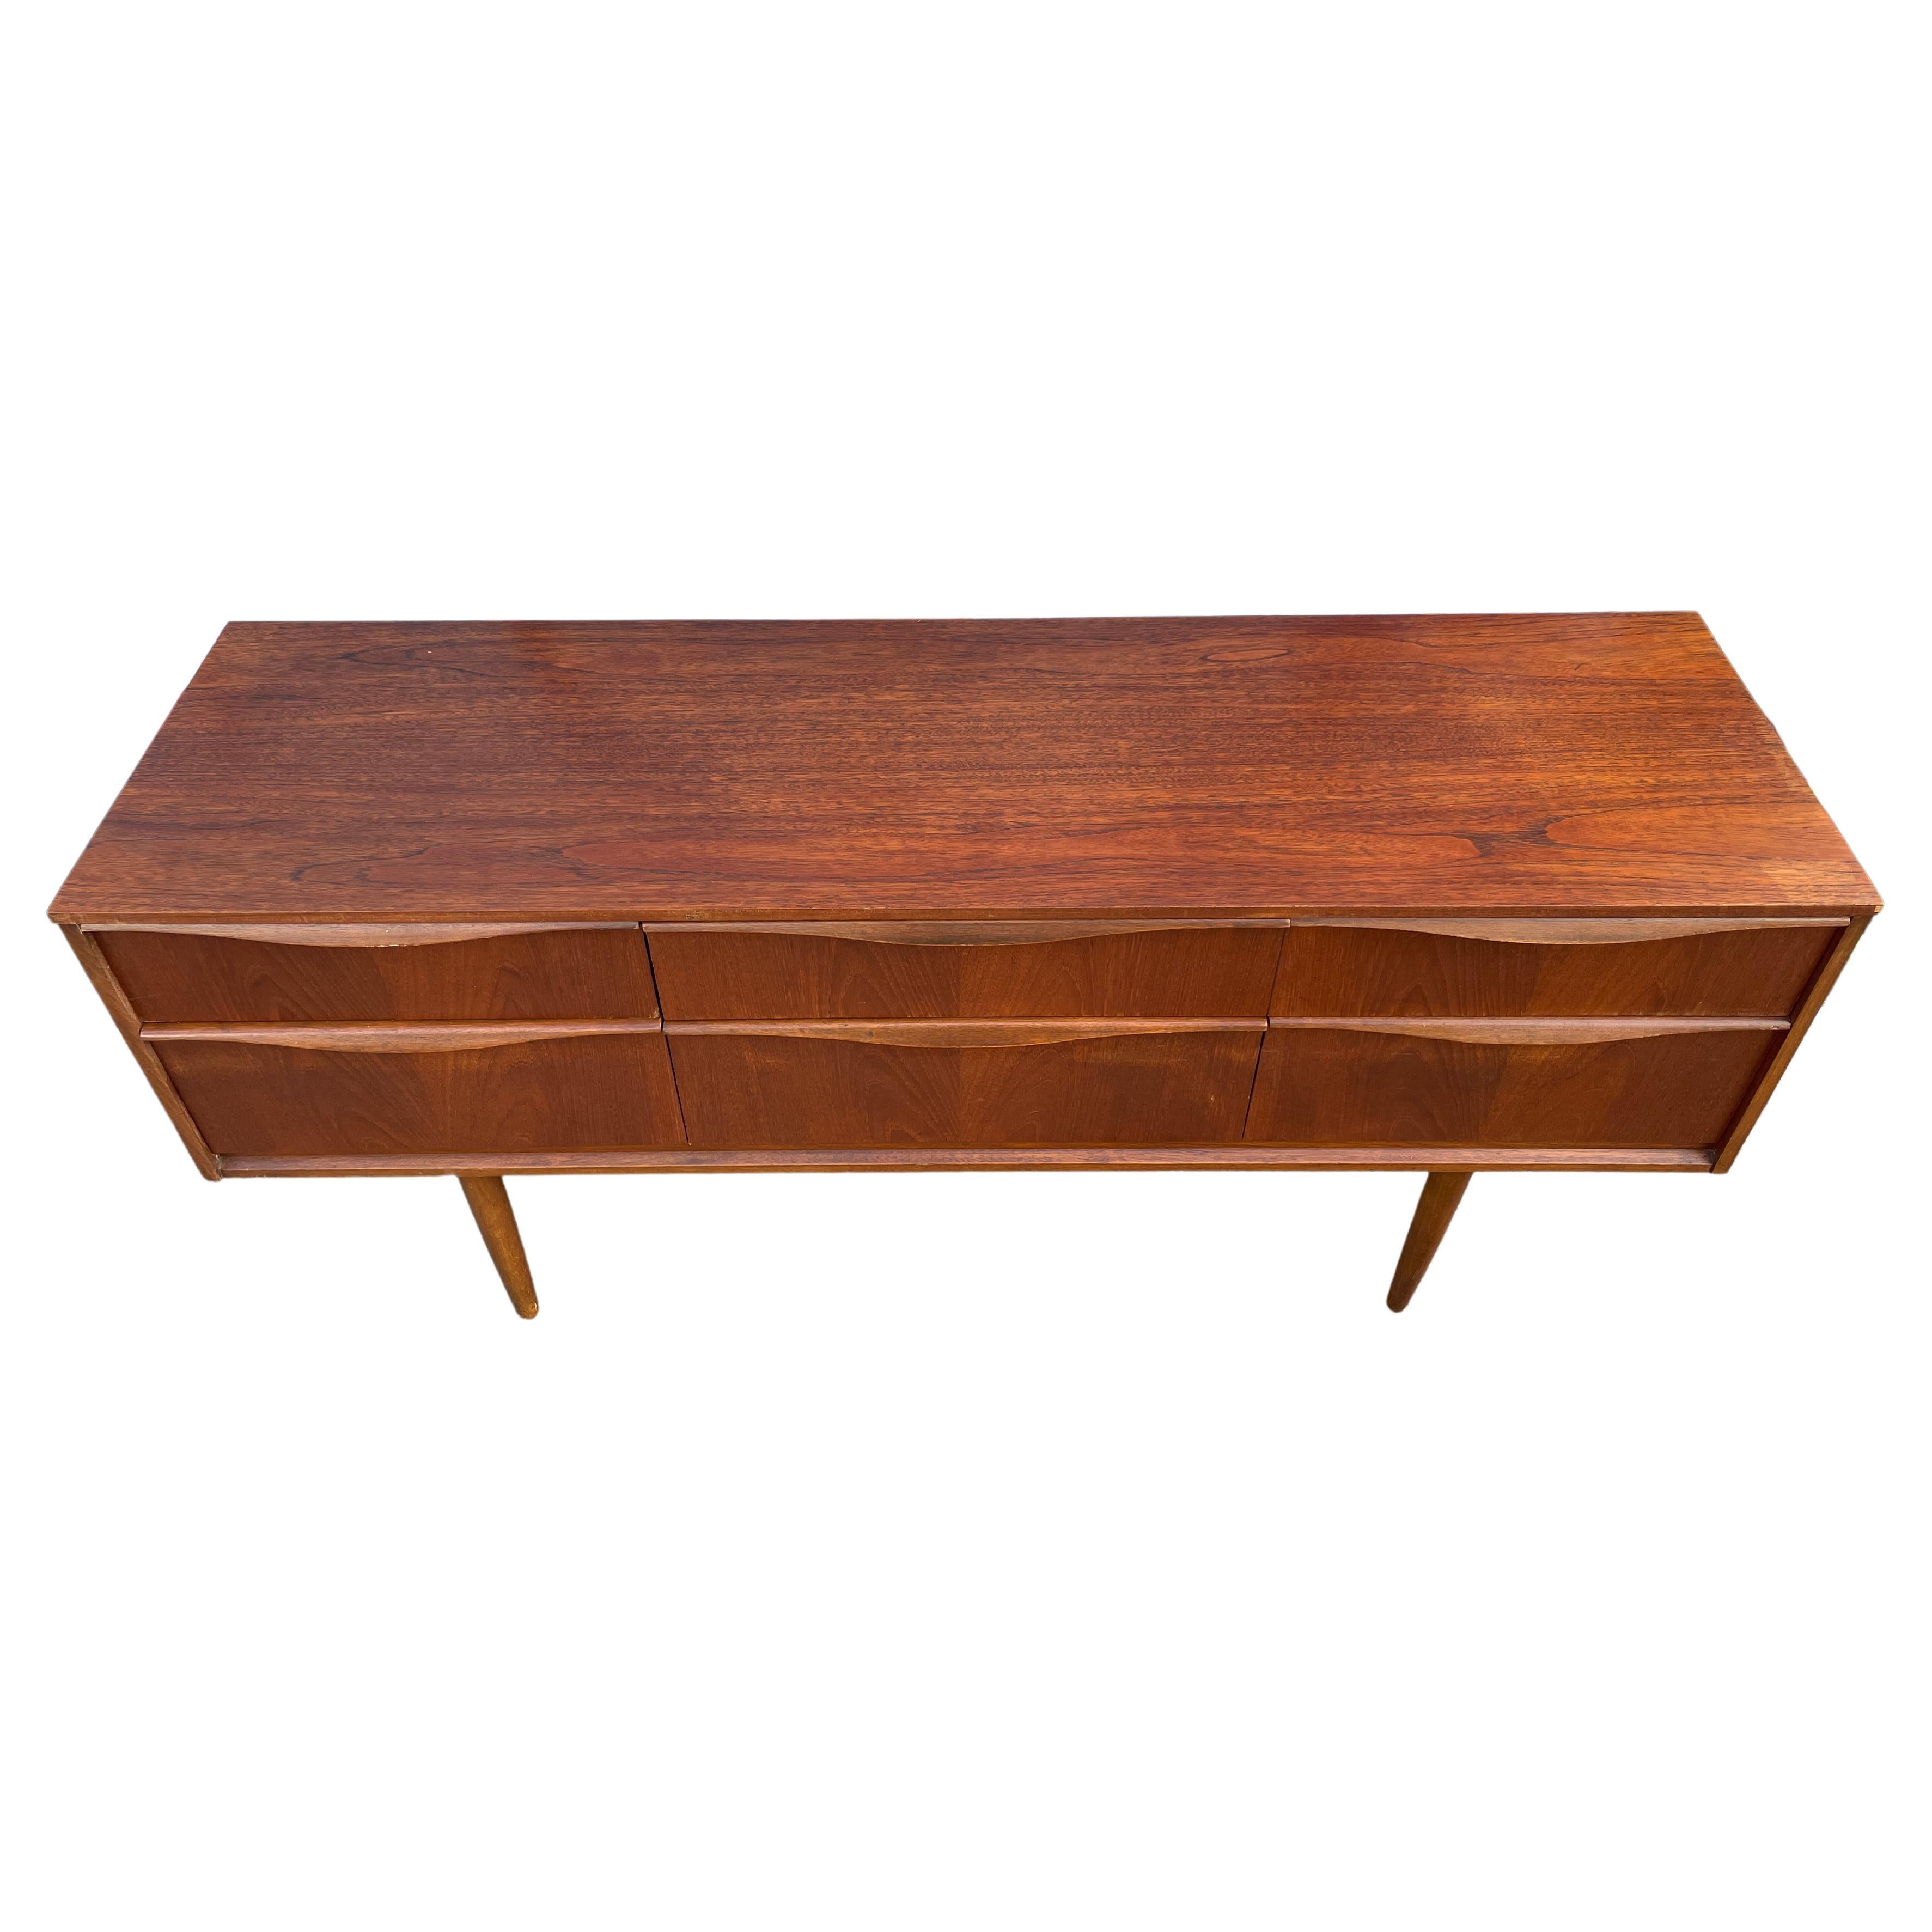 Mid century Scandinavian modern teak low 6 drawer credenza dresser. Beautiful simple designed Low Dresser or Credenza in the style of Børge Mogensen - dark teak wood with sculpted handles. Sits high on 4 tapered teak legs. Clean inside and out. Made